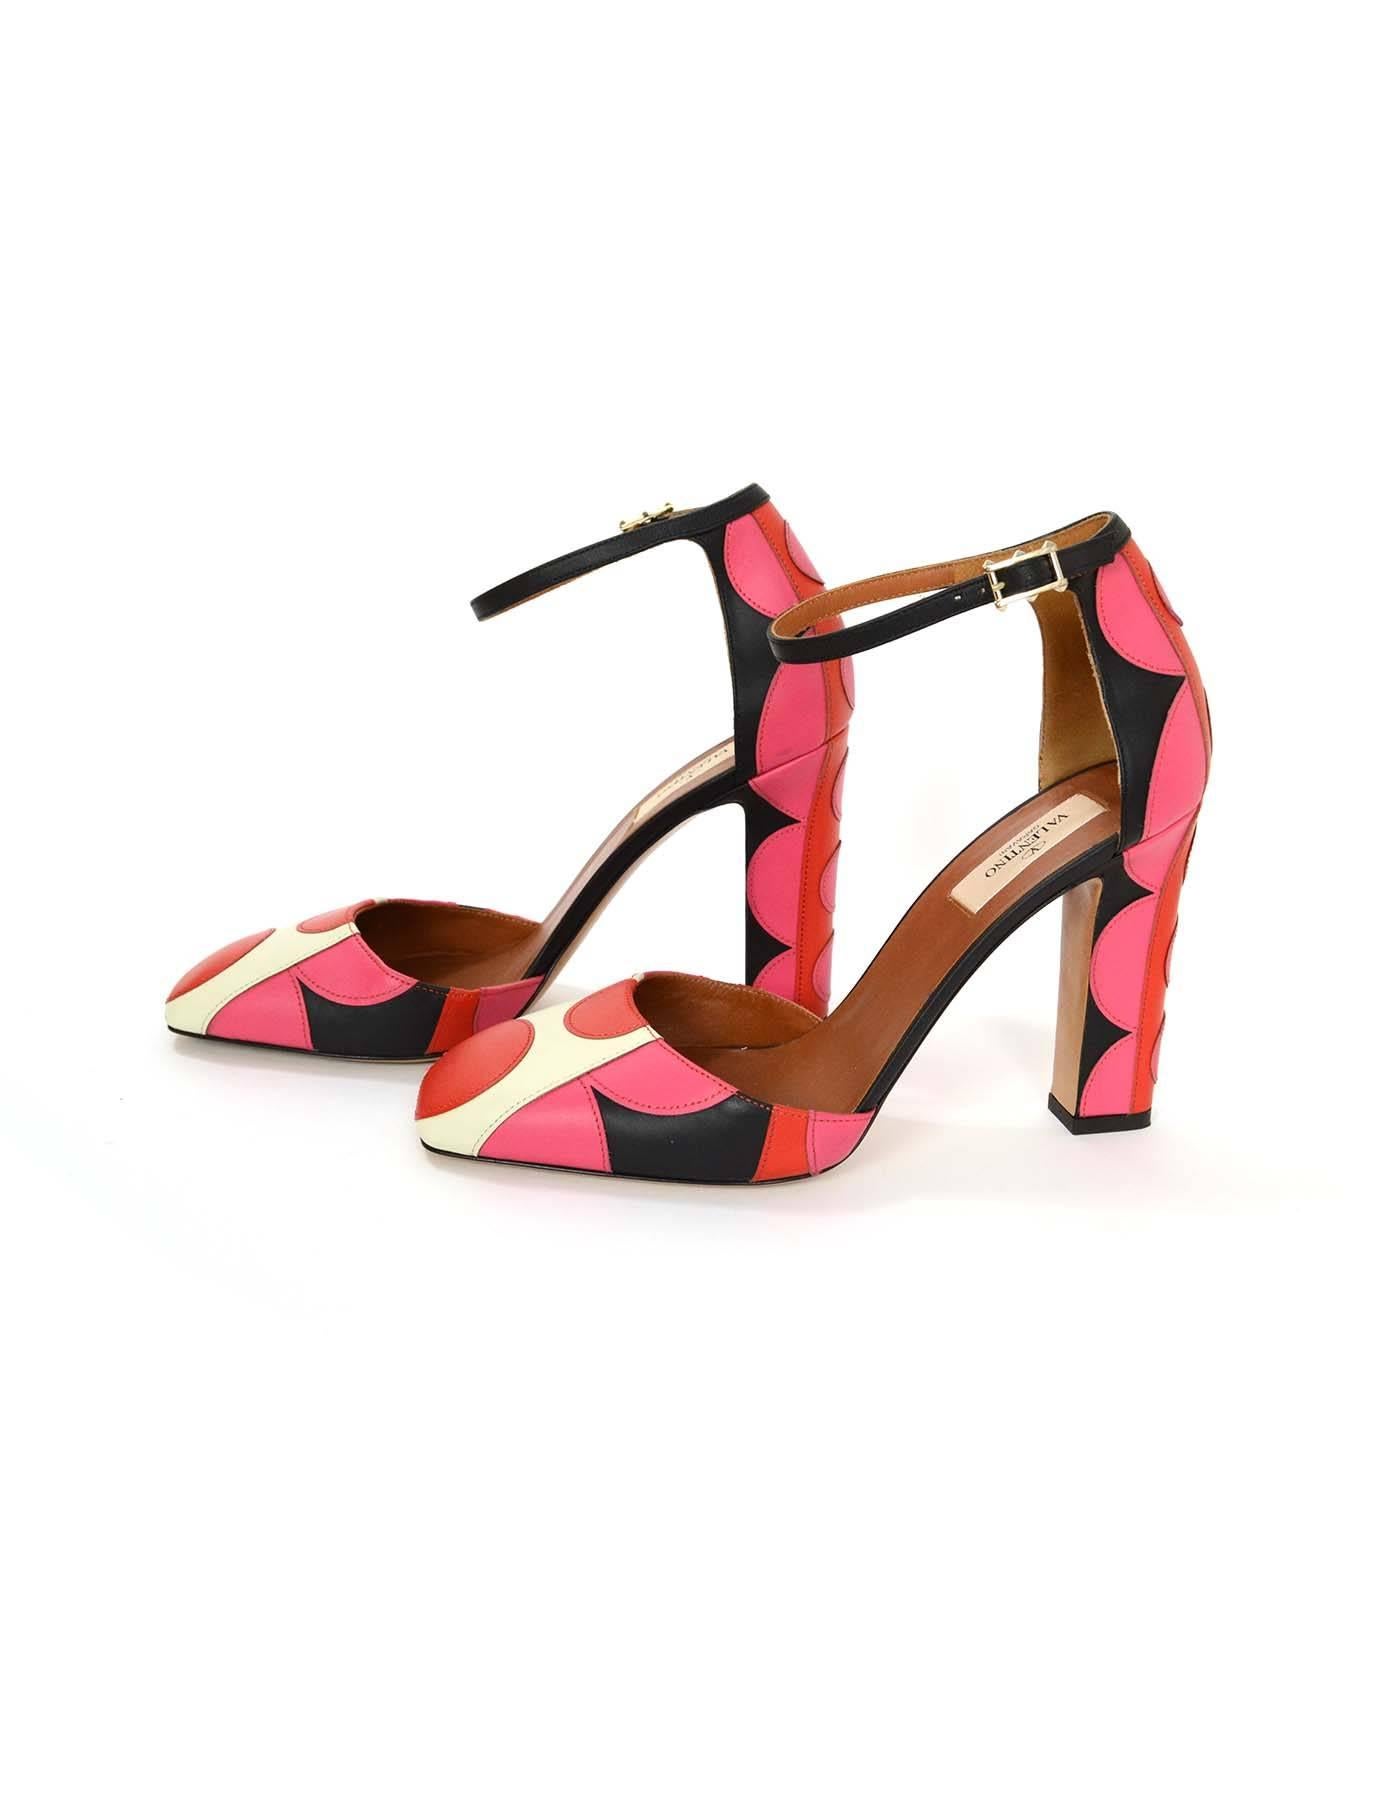 Valentino Red & Pink Polka Dot Pumps 
Features layered leather polka dots stitched throughout
Made In: Italy
Color: Black, cream, red and pink
Materials: Leather
Closure/Opening: Ankle strap with buckle and notch closure
Sole Stamp: Valentino